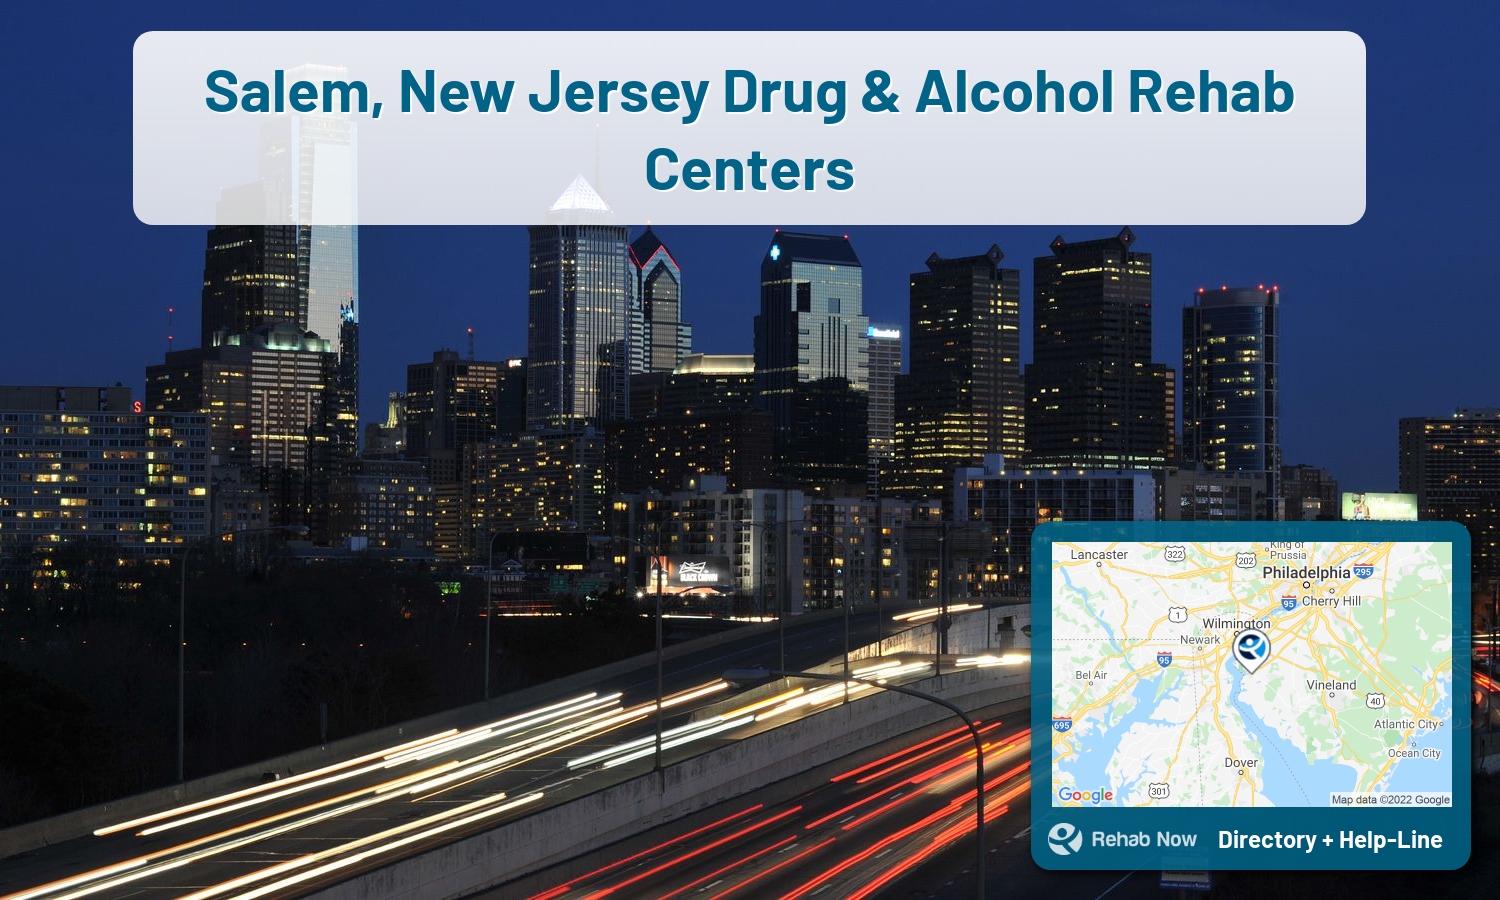 List of alcohol and drug treatment centers near you in Salem, New Jersey. Research certifications, programs, methods, pricing, and more.